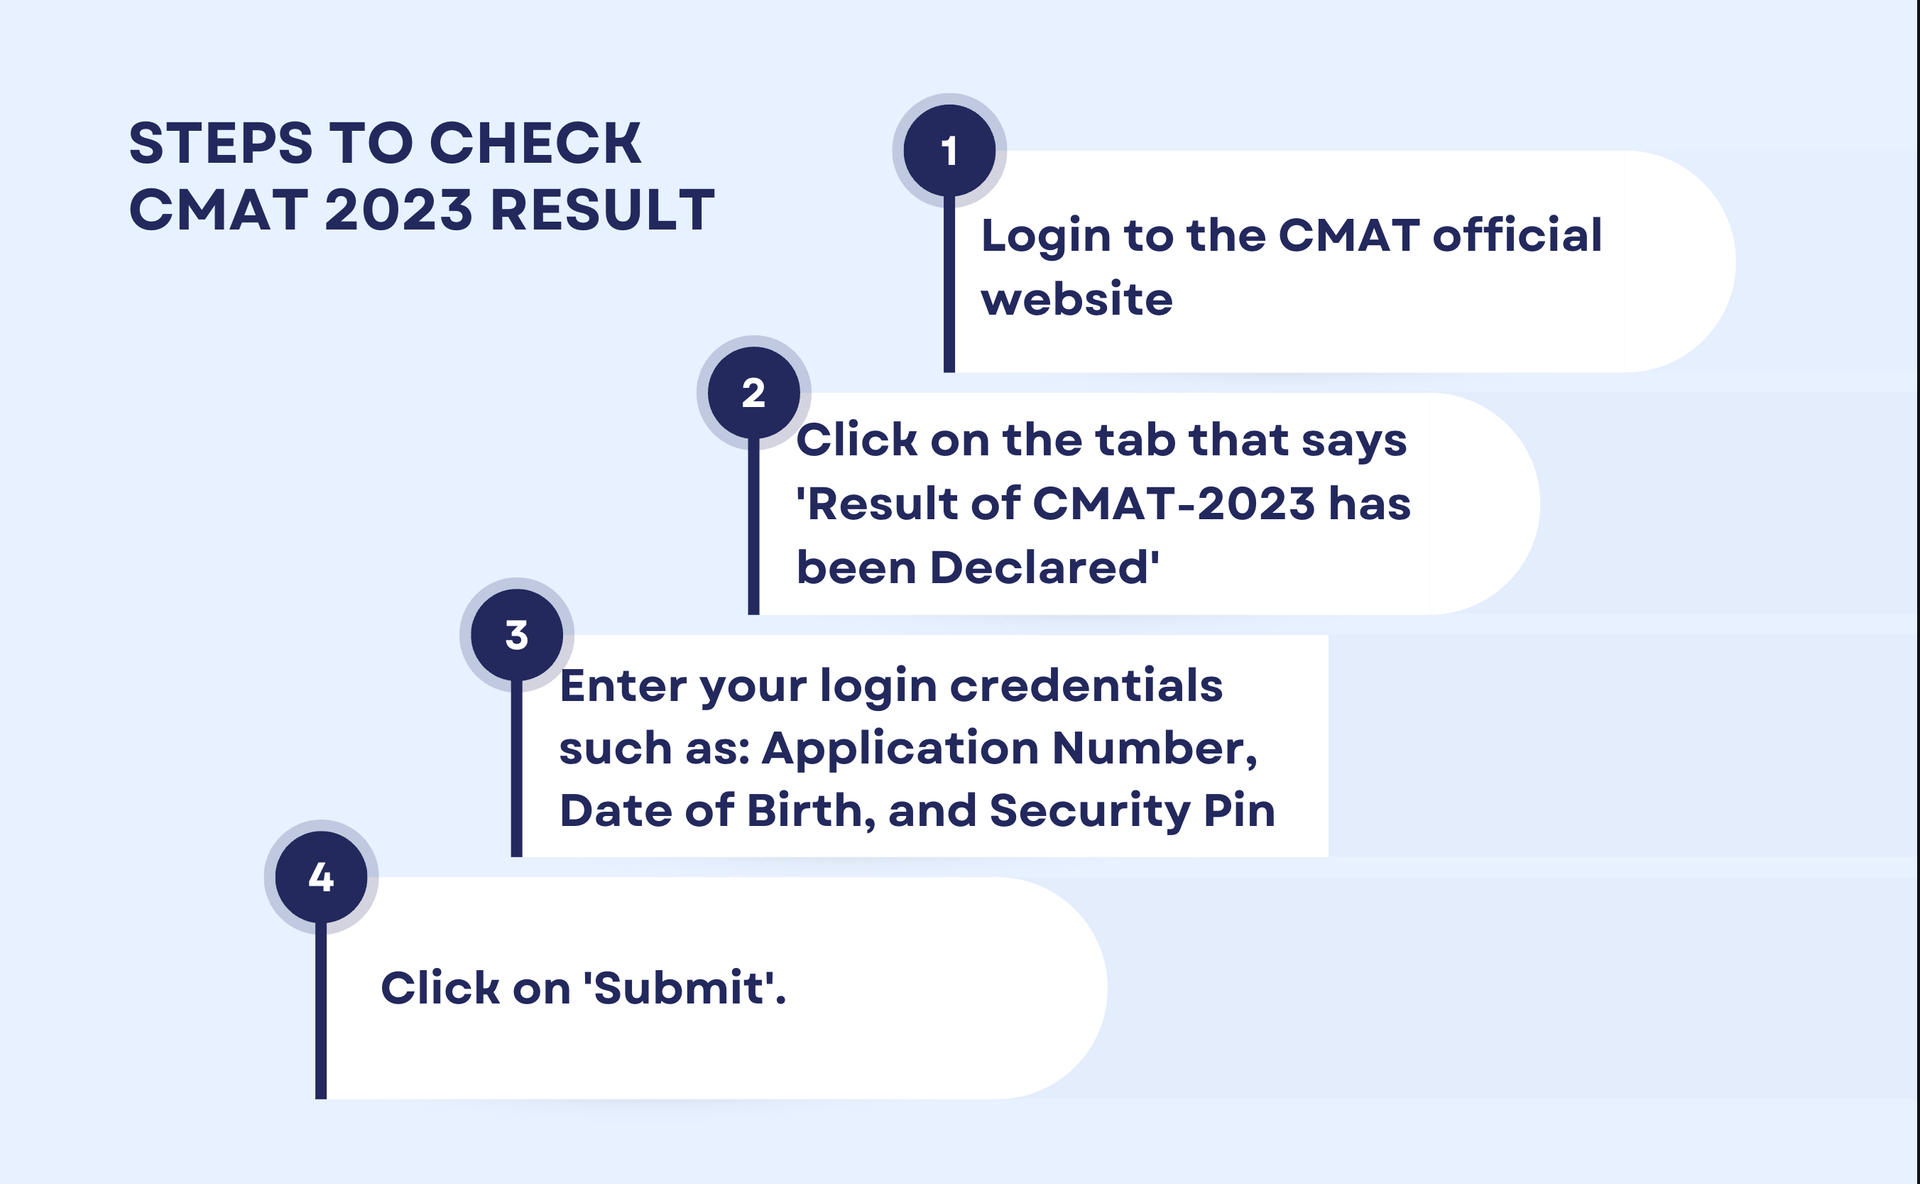 How to Check CMAT Result 2023